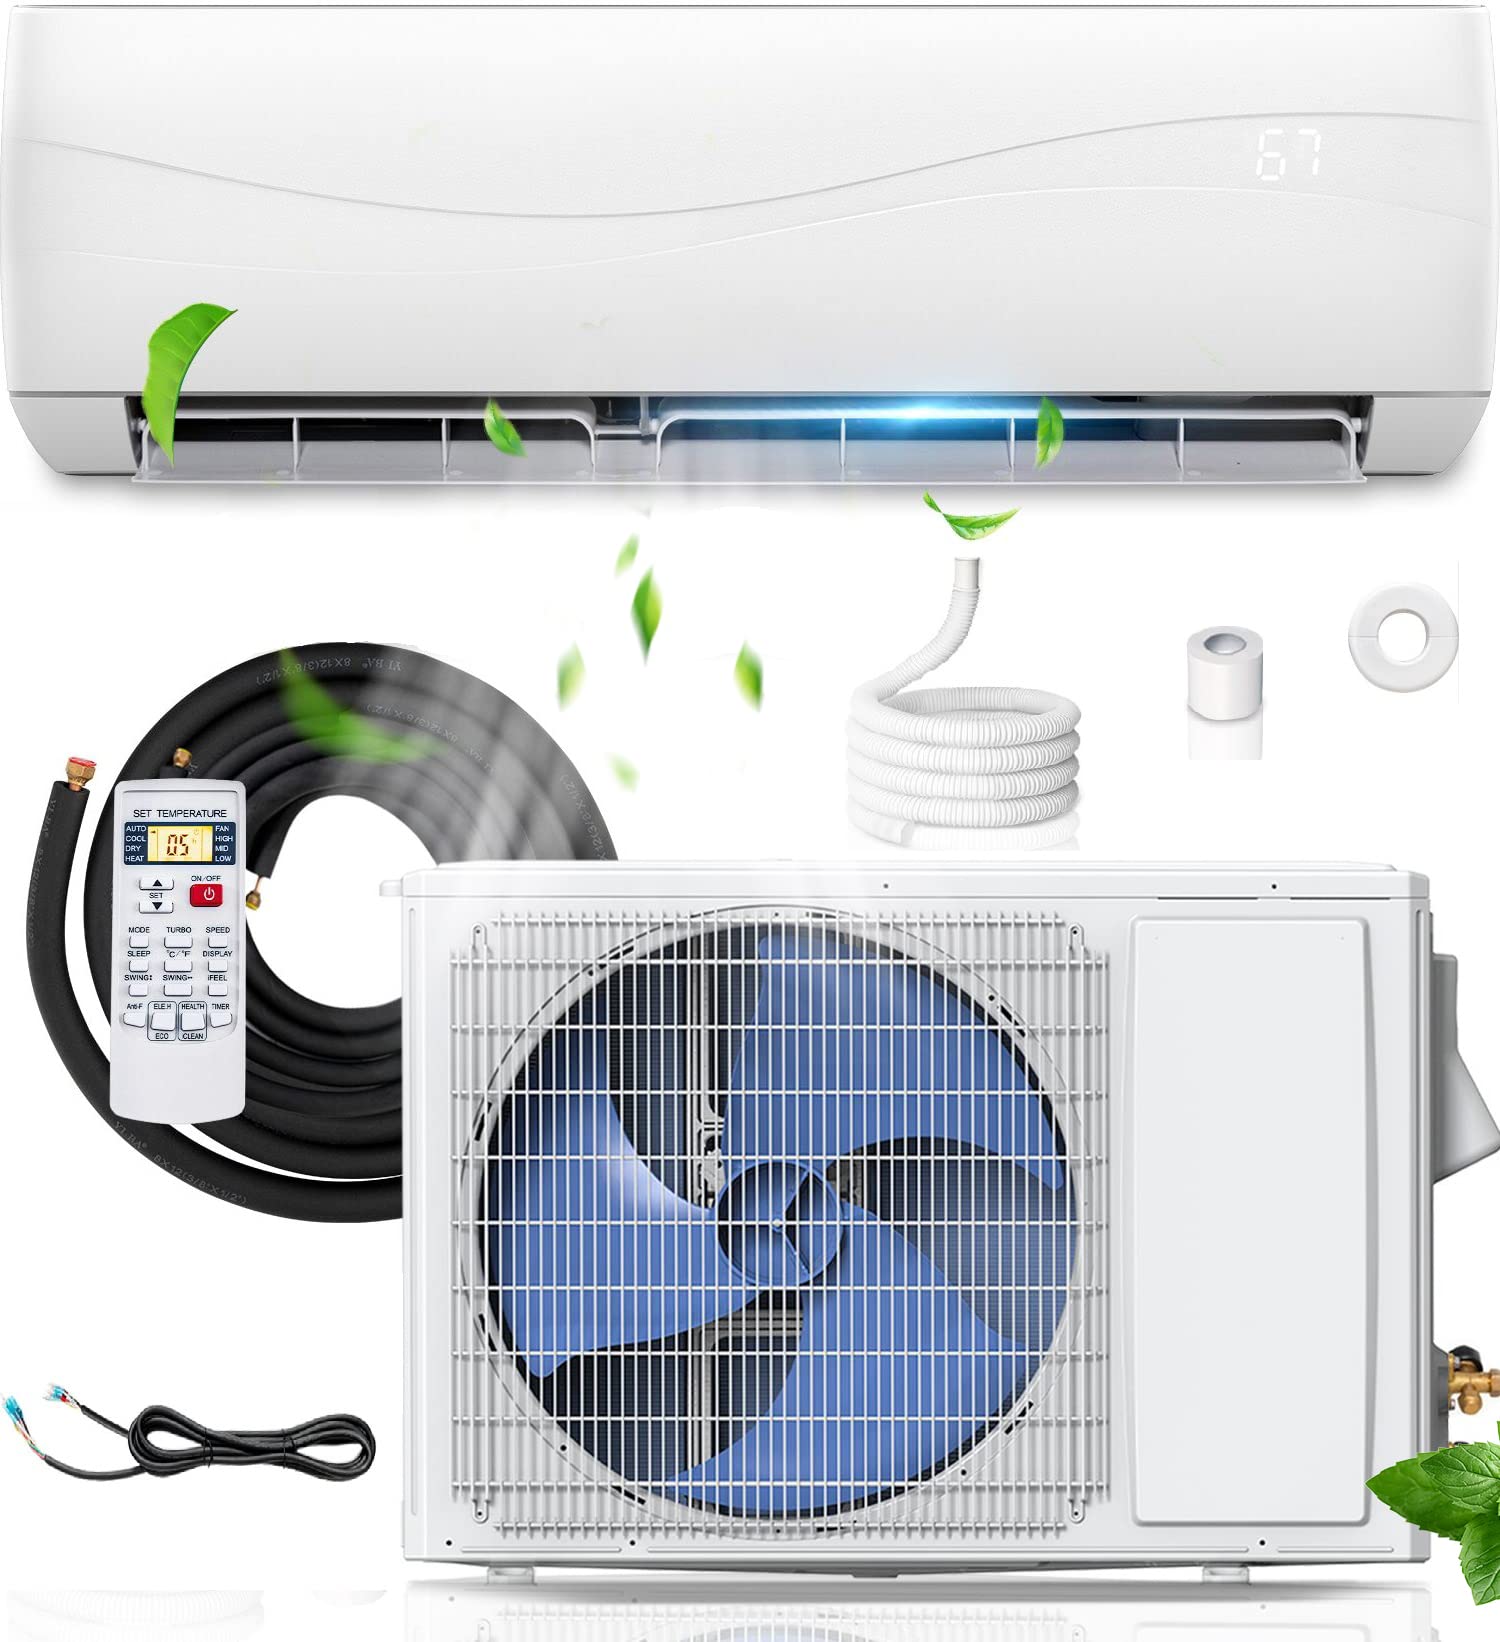 SIMOE Split Ductless Air Conditioner and Heater